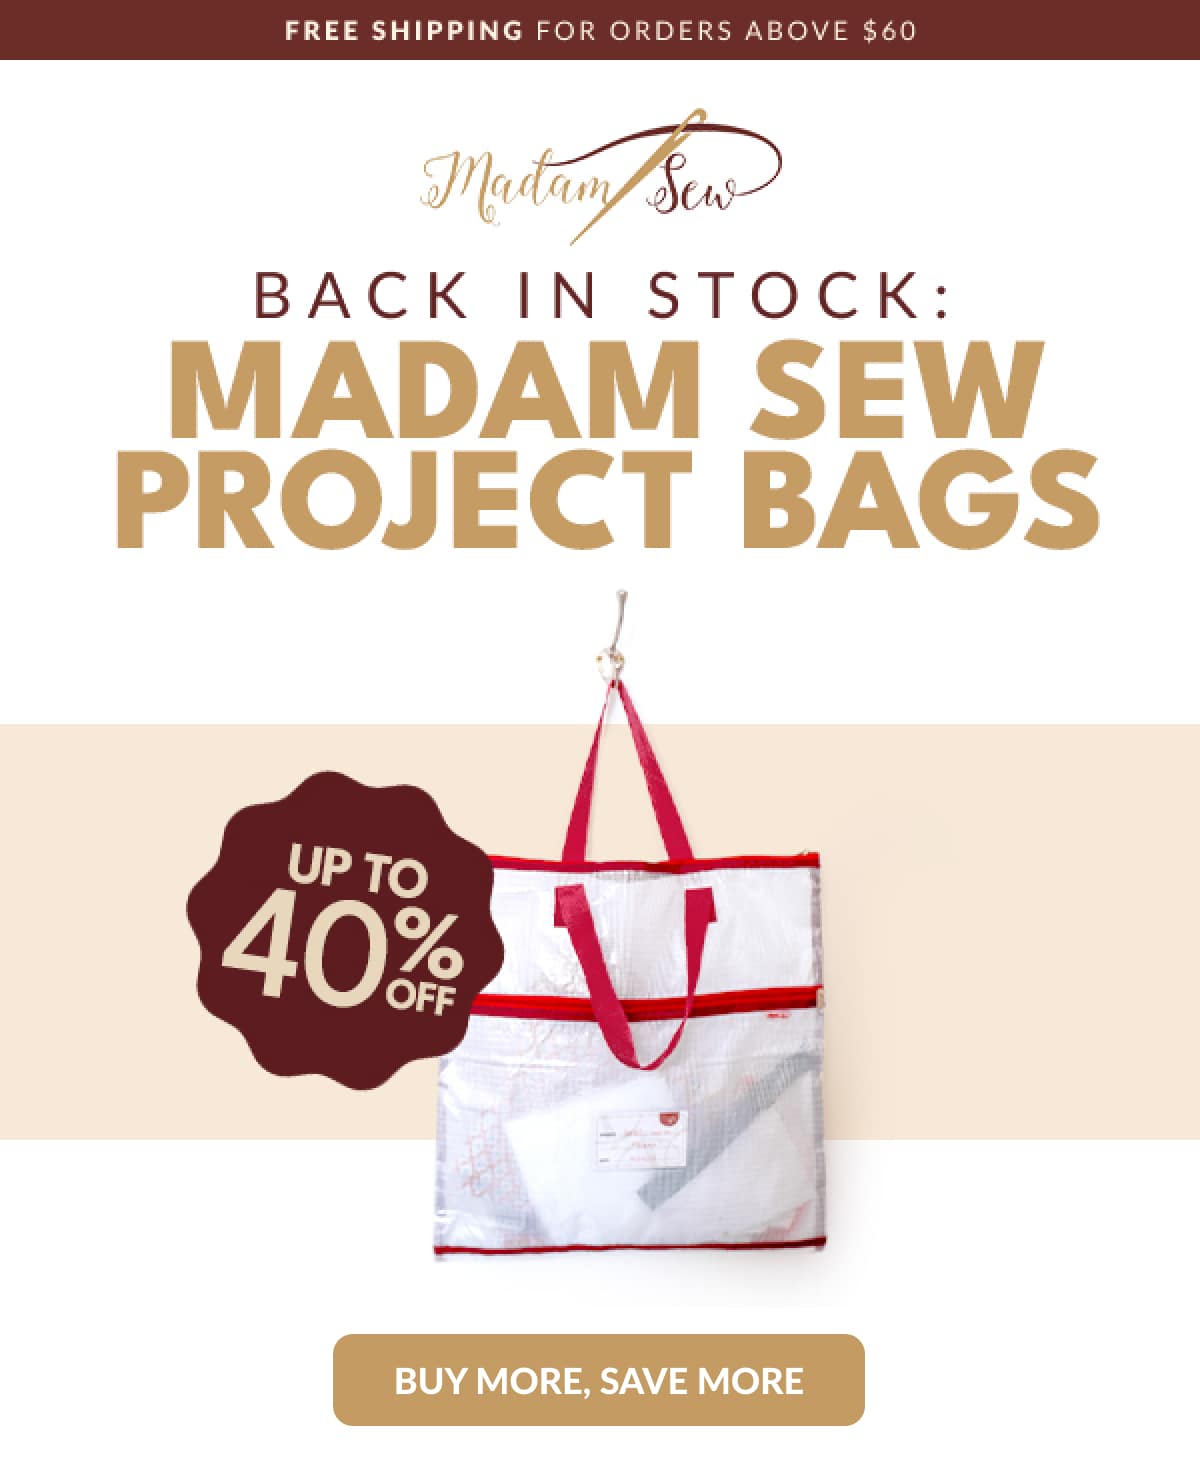 Back in stock: Madam Sew Project Bags